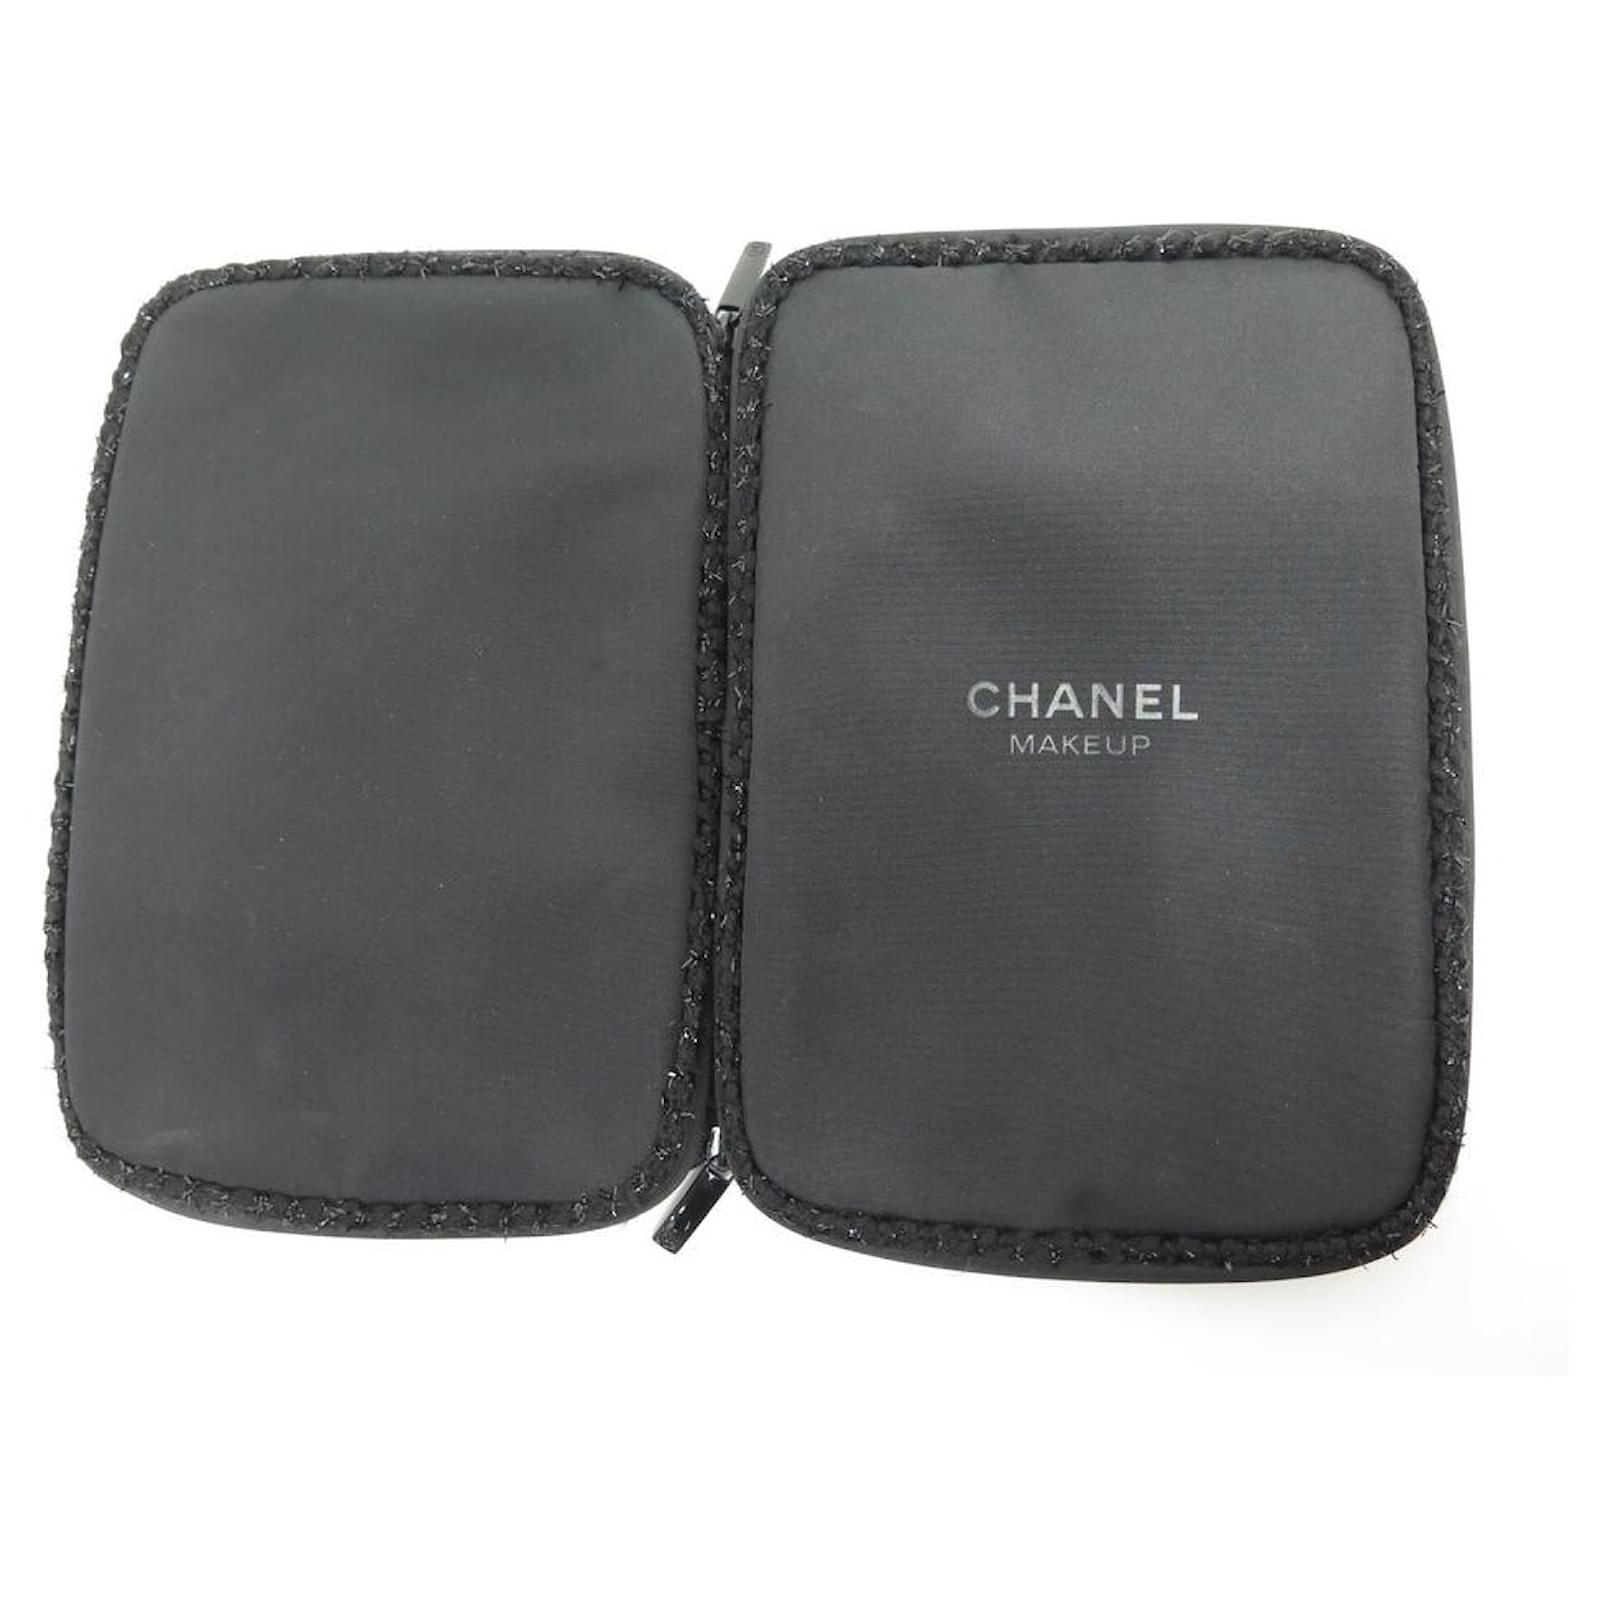 CHANEL MAKE UP CASE BLACK TWEED LISERET + BRUSHES COSMETIC POUCH